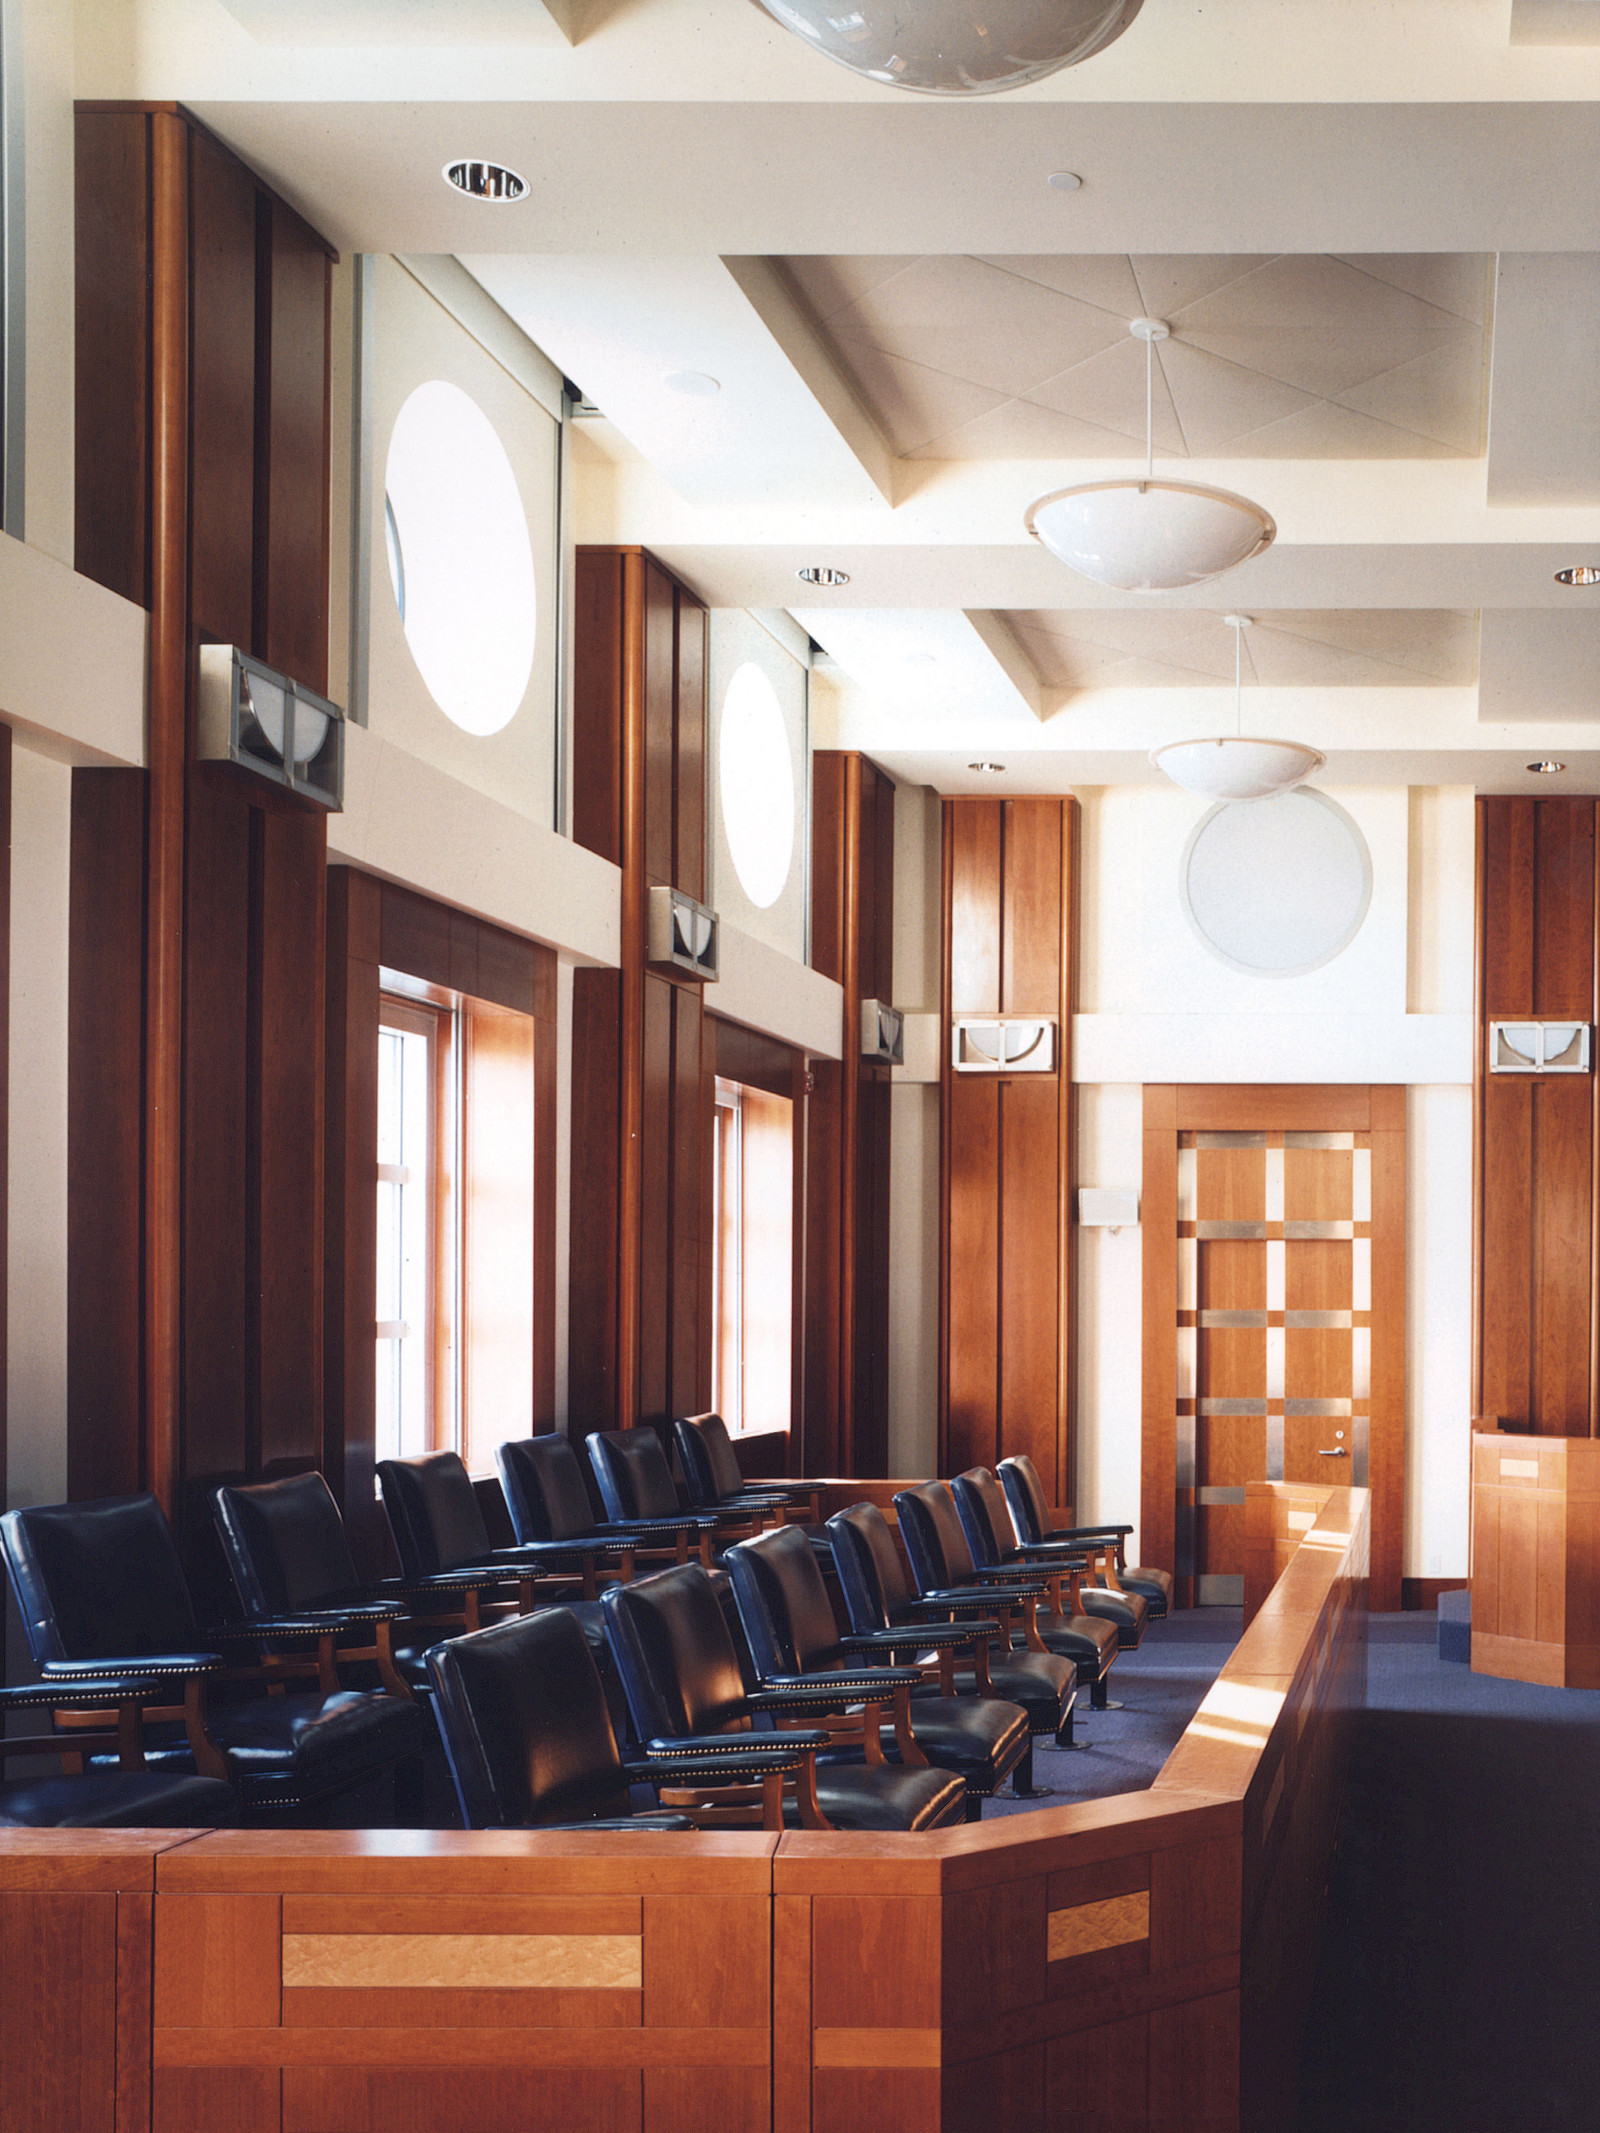 This gorgeous courtroom a jury box with wood inlay, wall and column paneling, judges chamber door in cherry and metal inlay. This project was one of our earlier technical projects and it truly showcases the talented craftsmen we have in our shop.